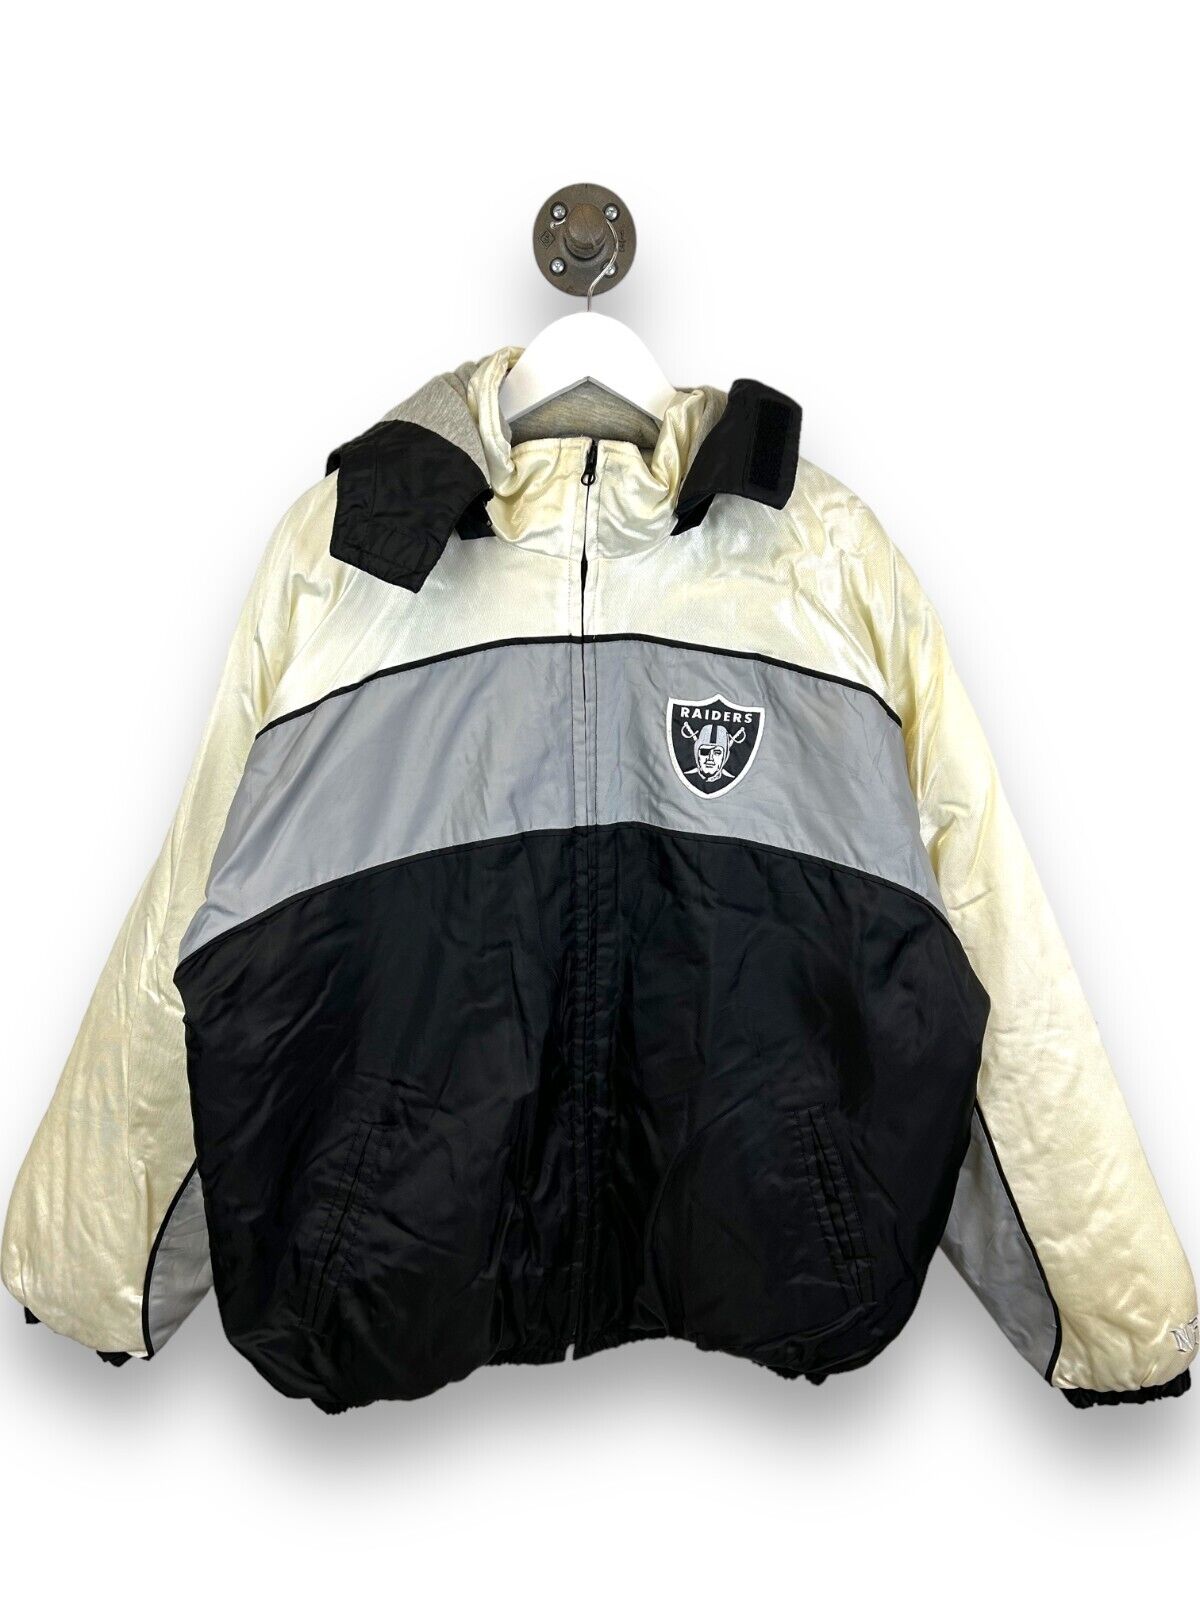 Vintage Oakland Raiders NFL Stitched Insulated Full Zip Hooded Jacket Size XL